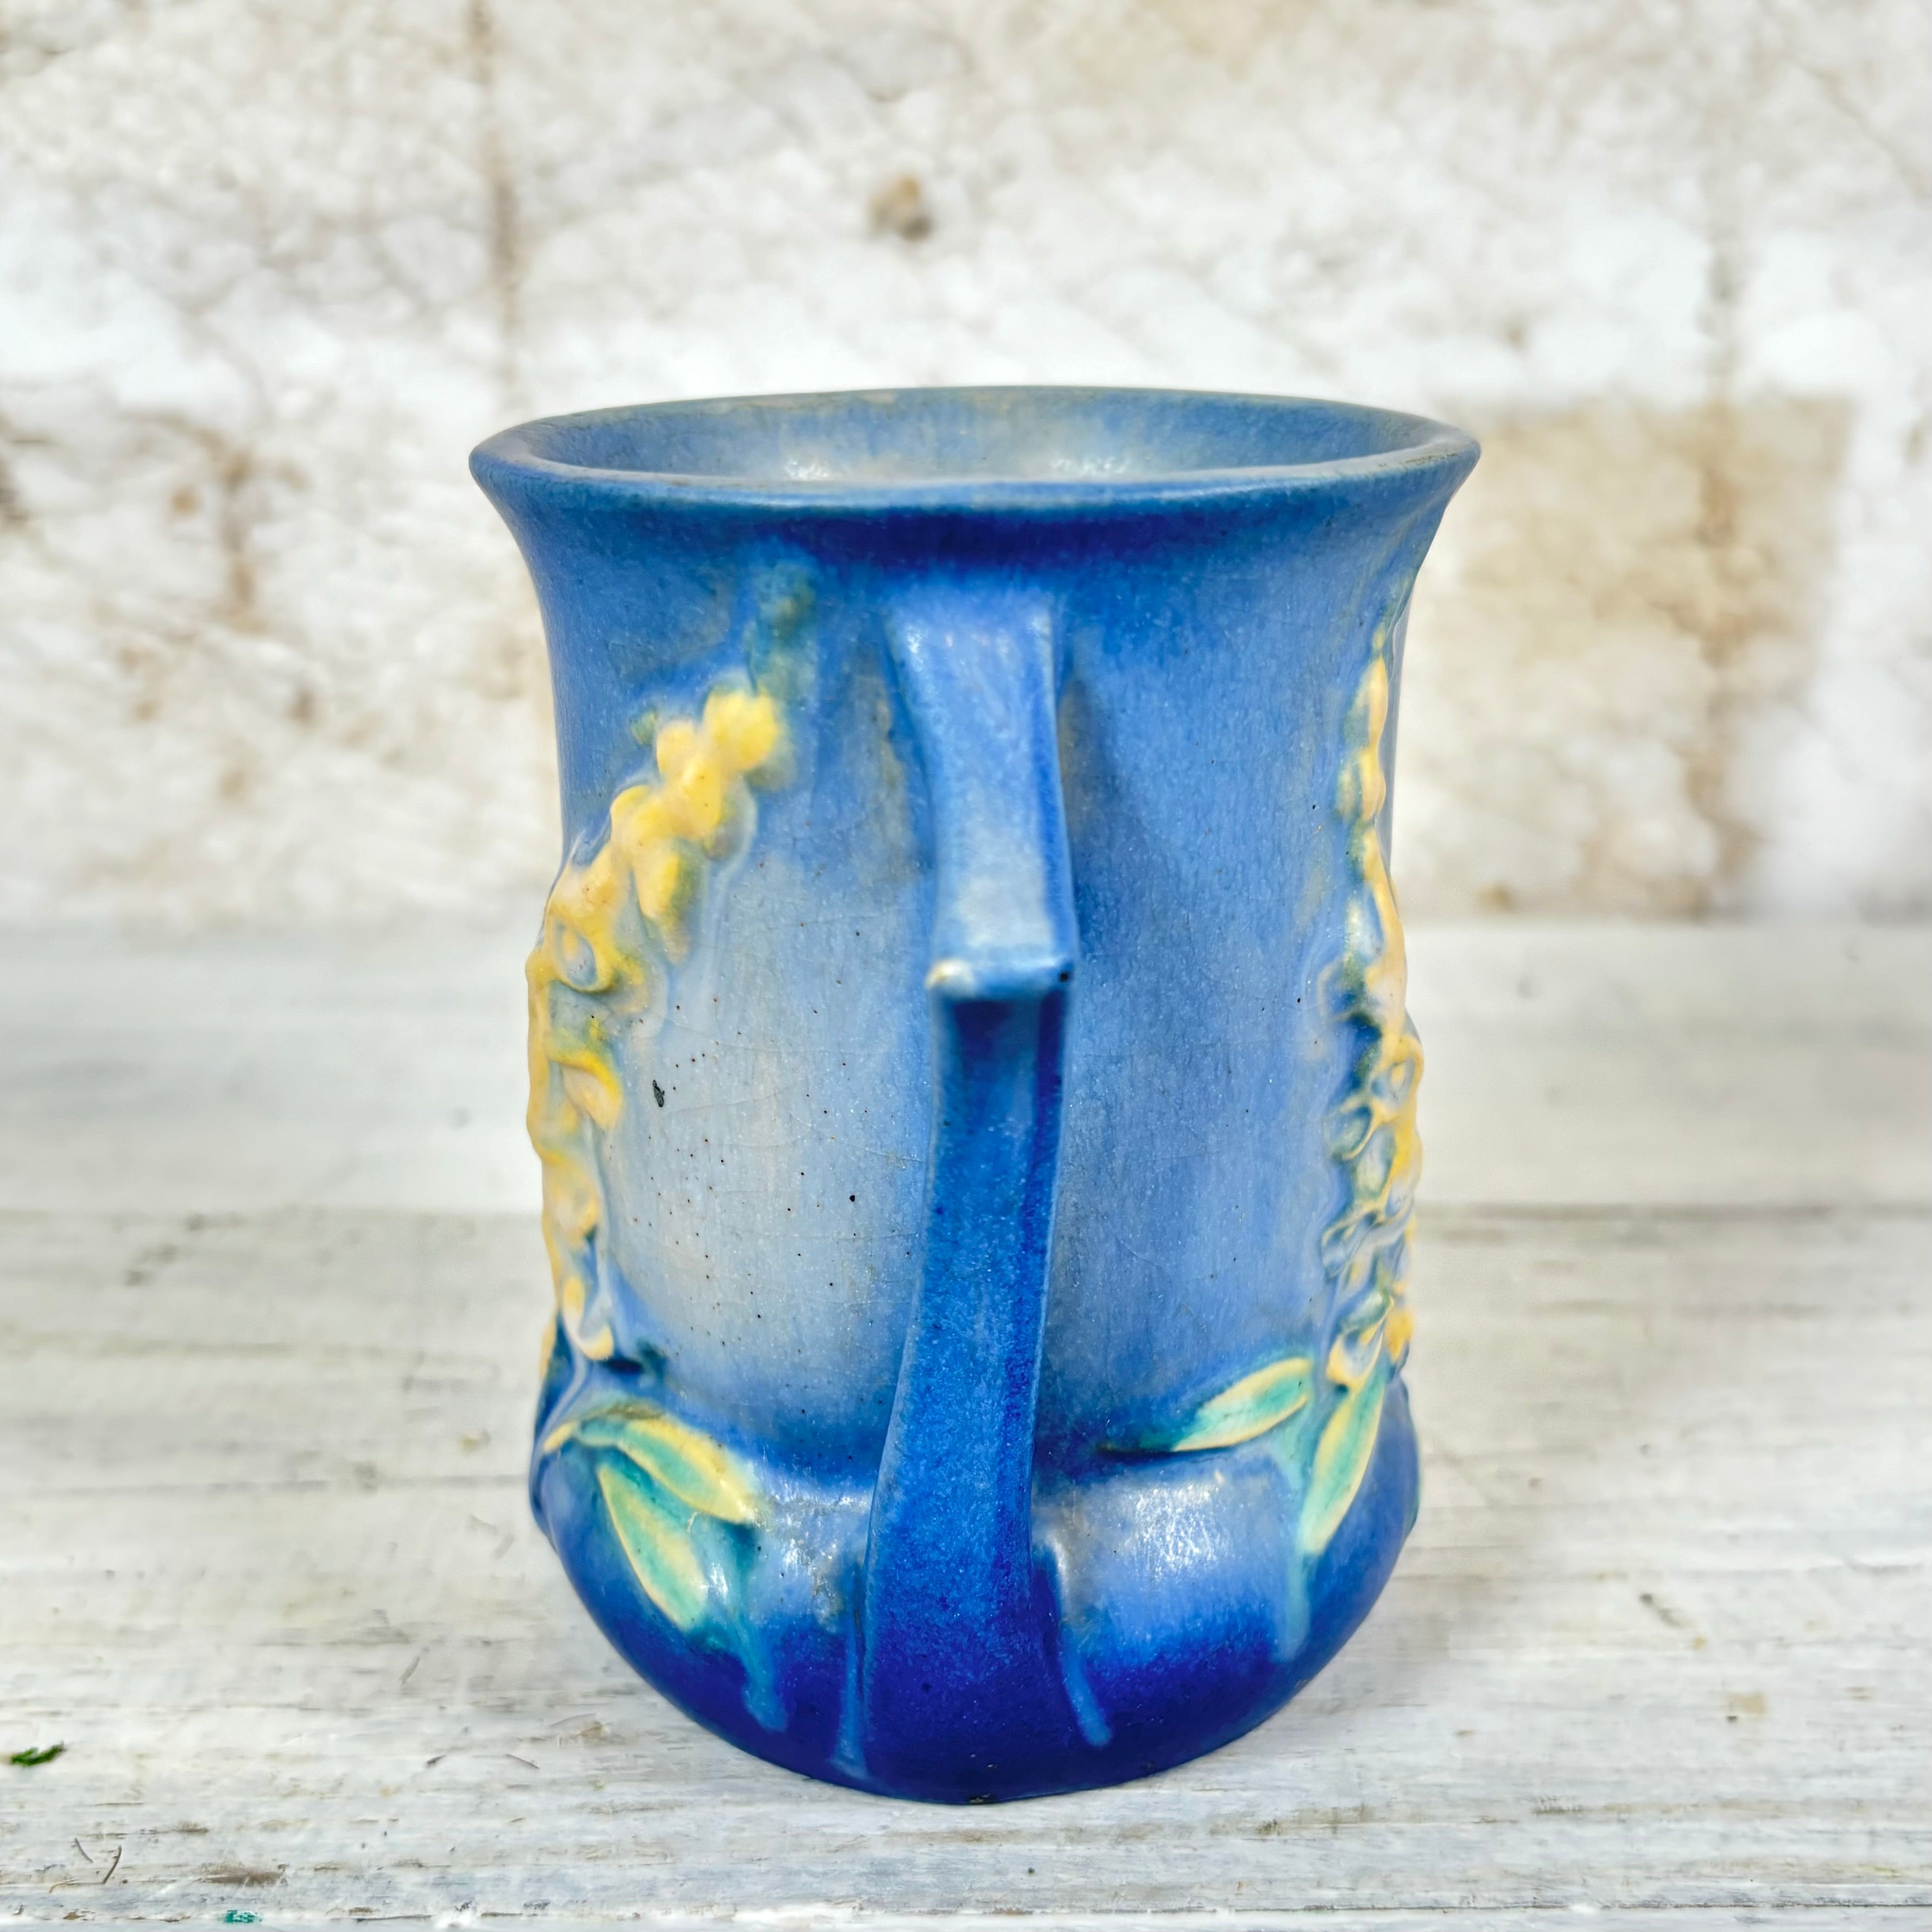 Roseville Blue Pottery with Flowers